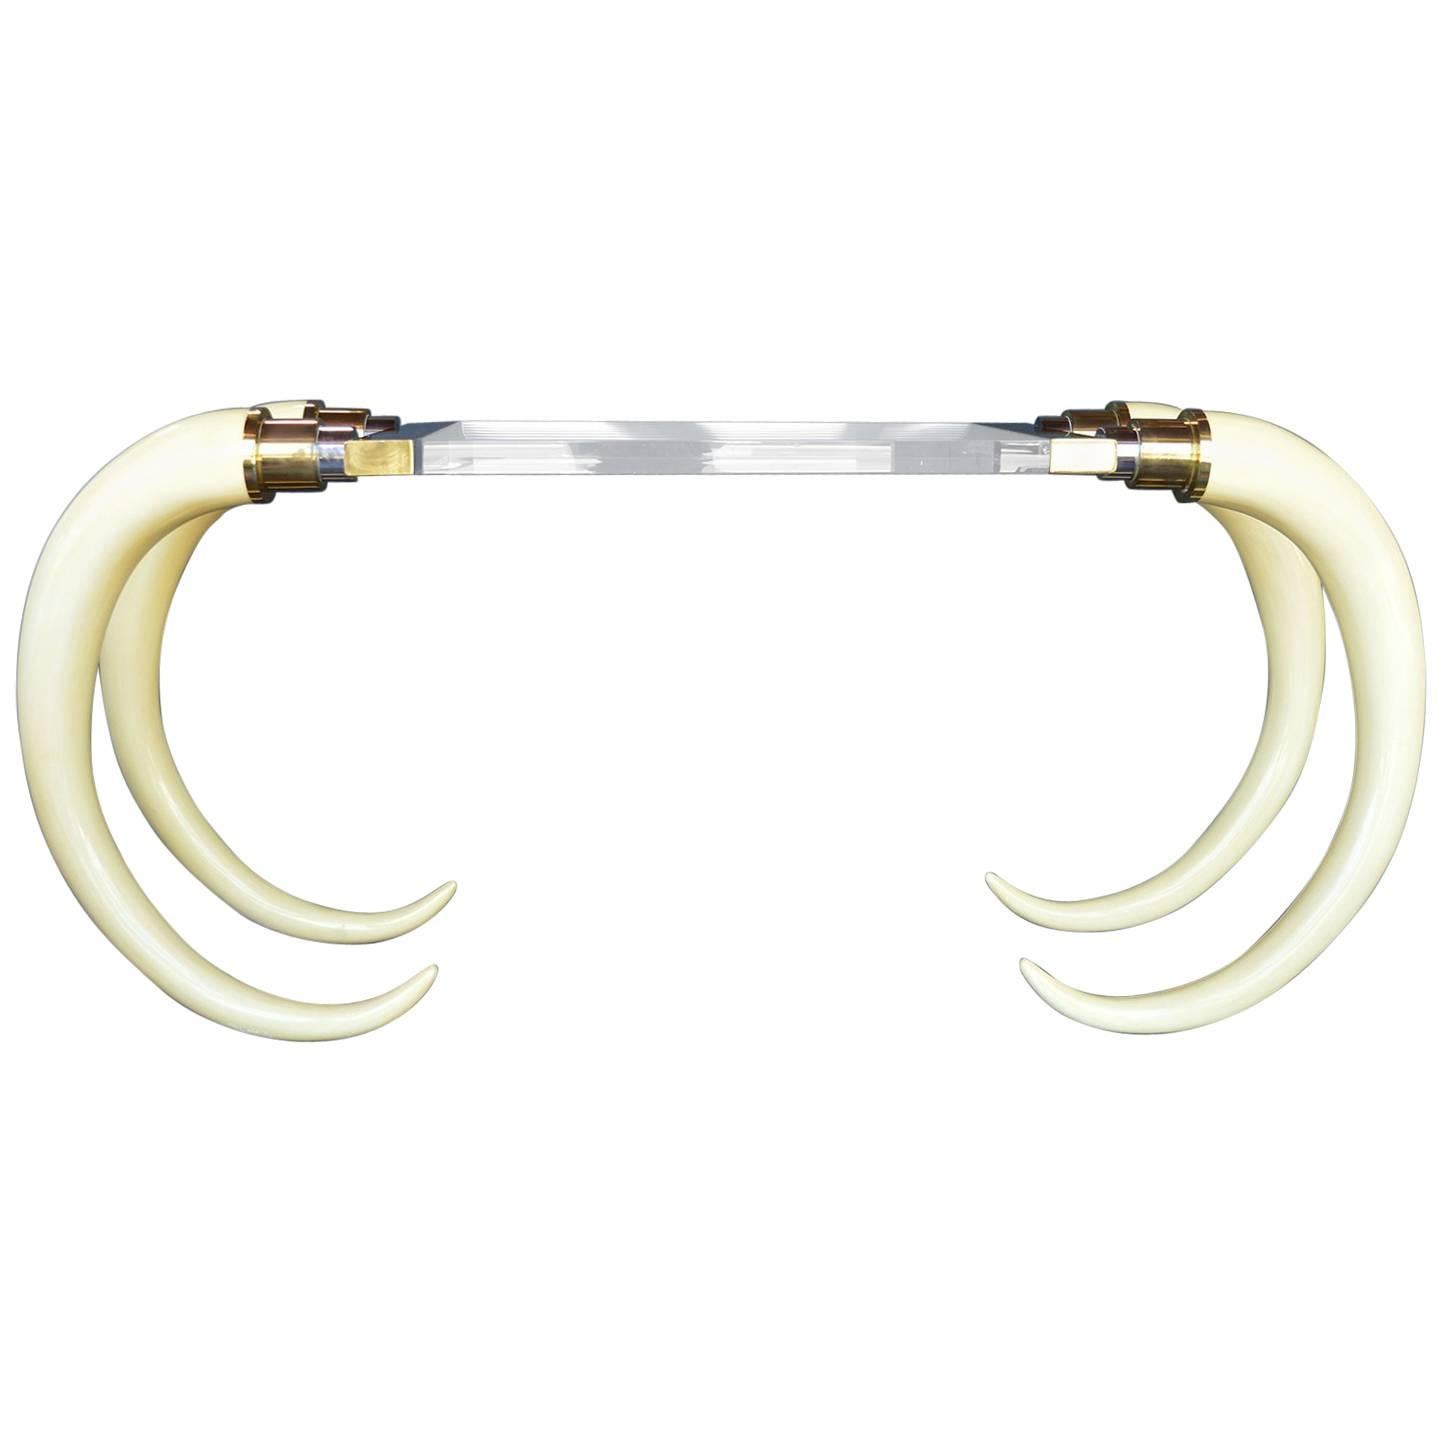 Vintage Lucite and Faux Tusk Console